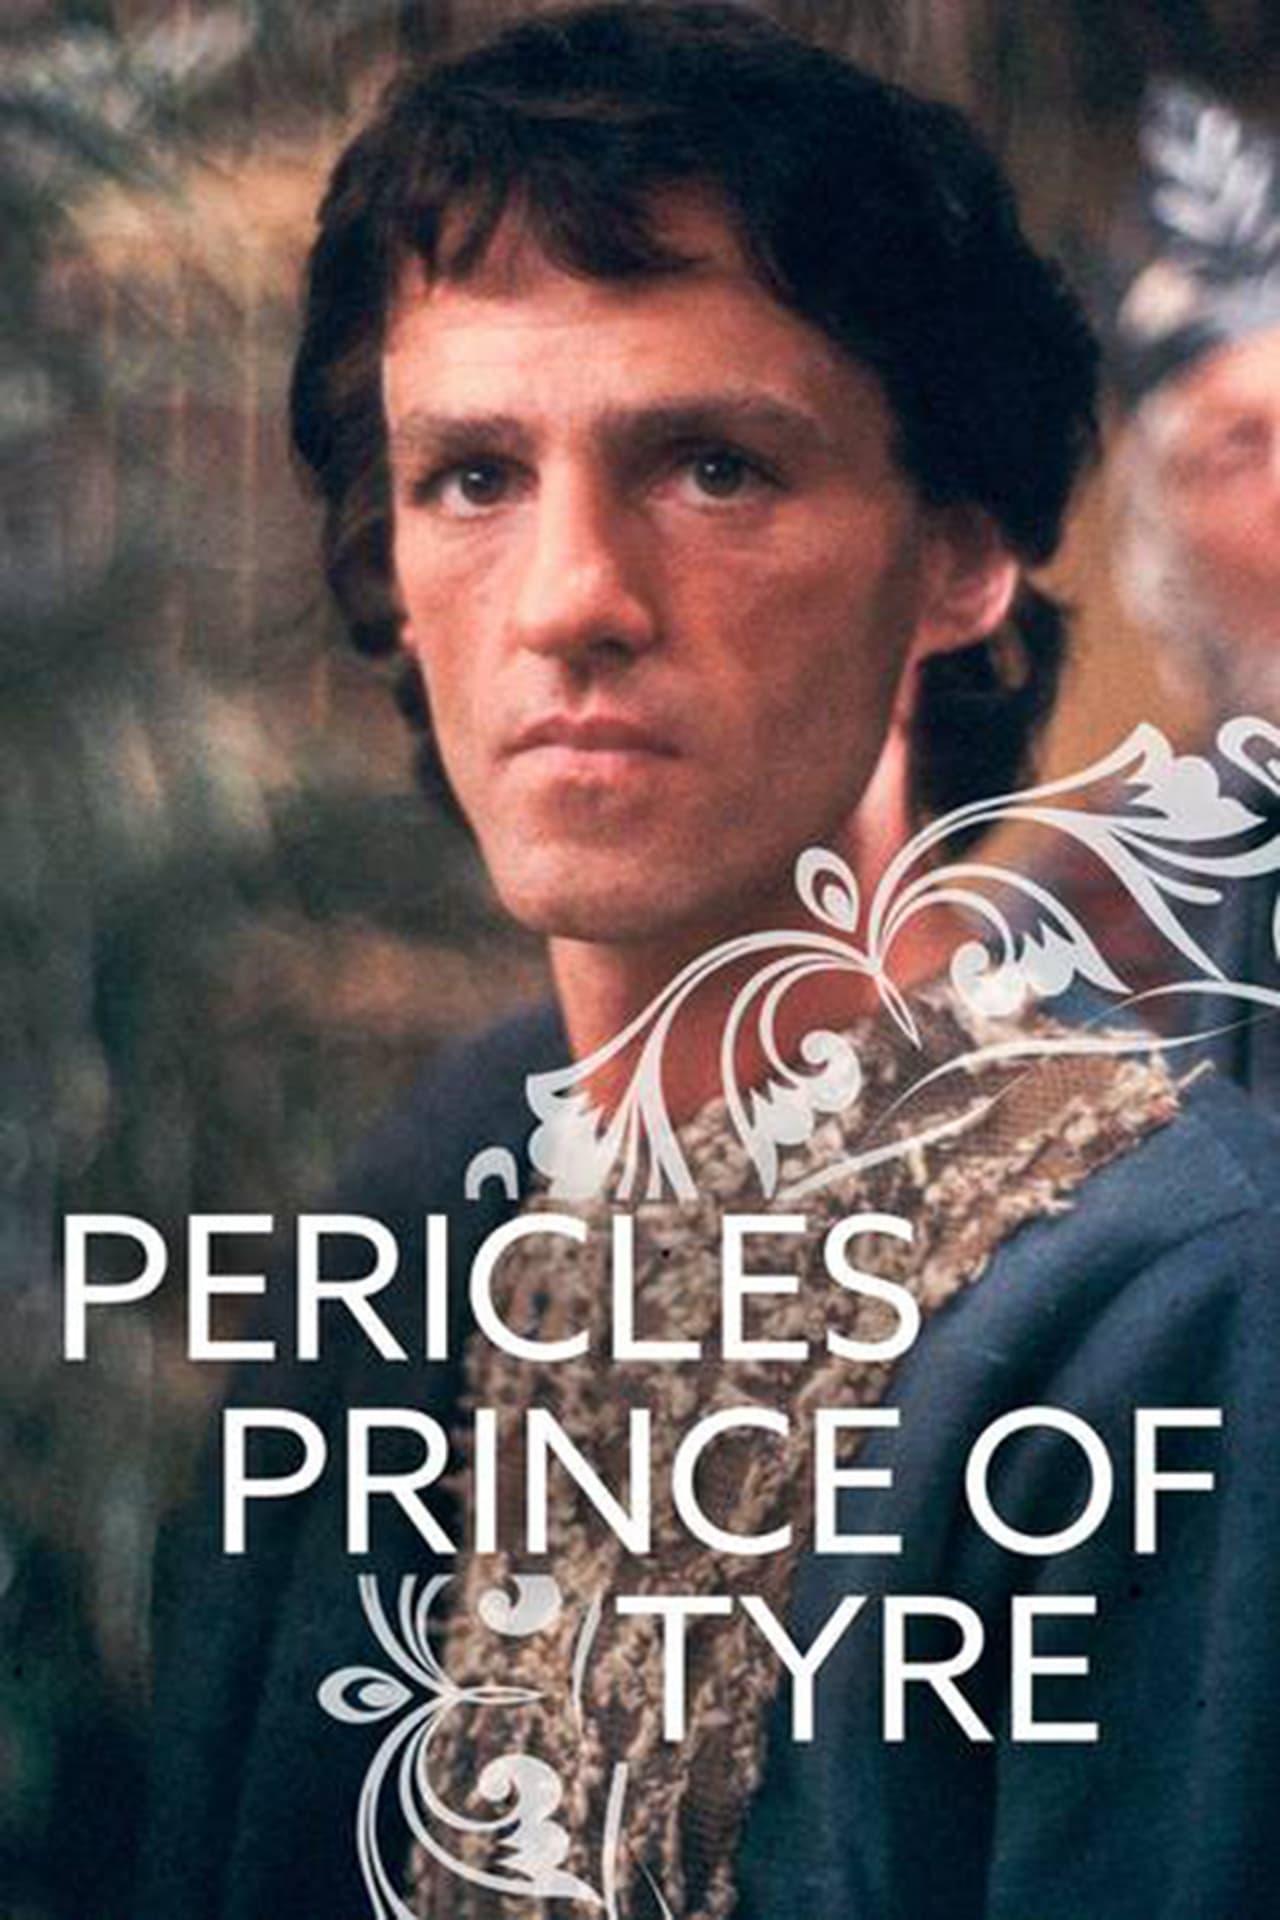 Pericles, Prince of Tyre poster